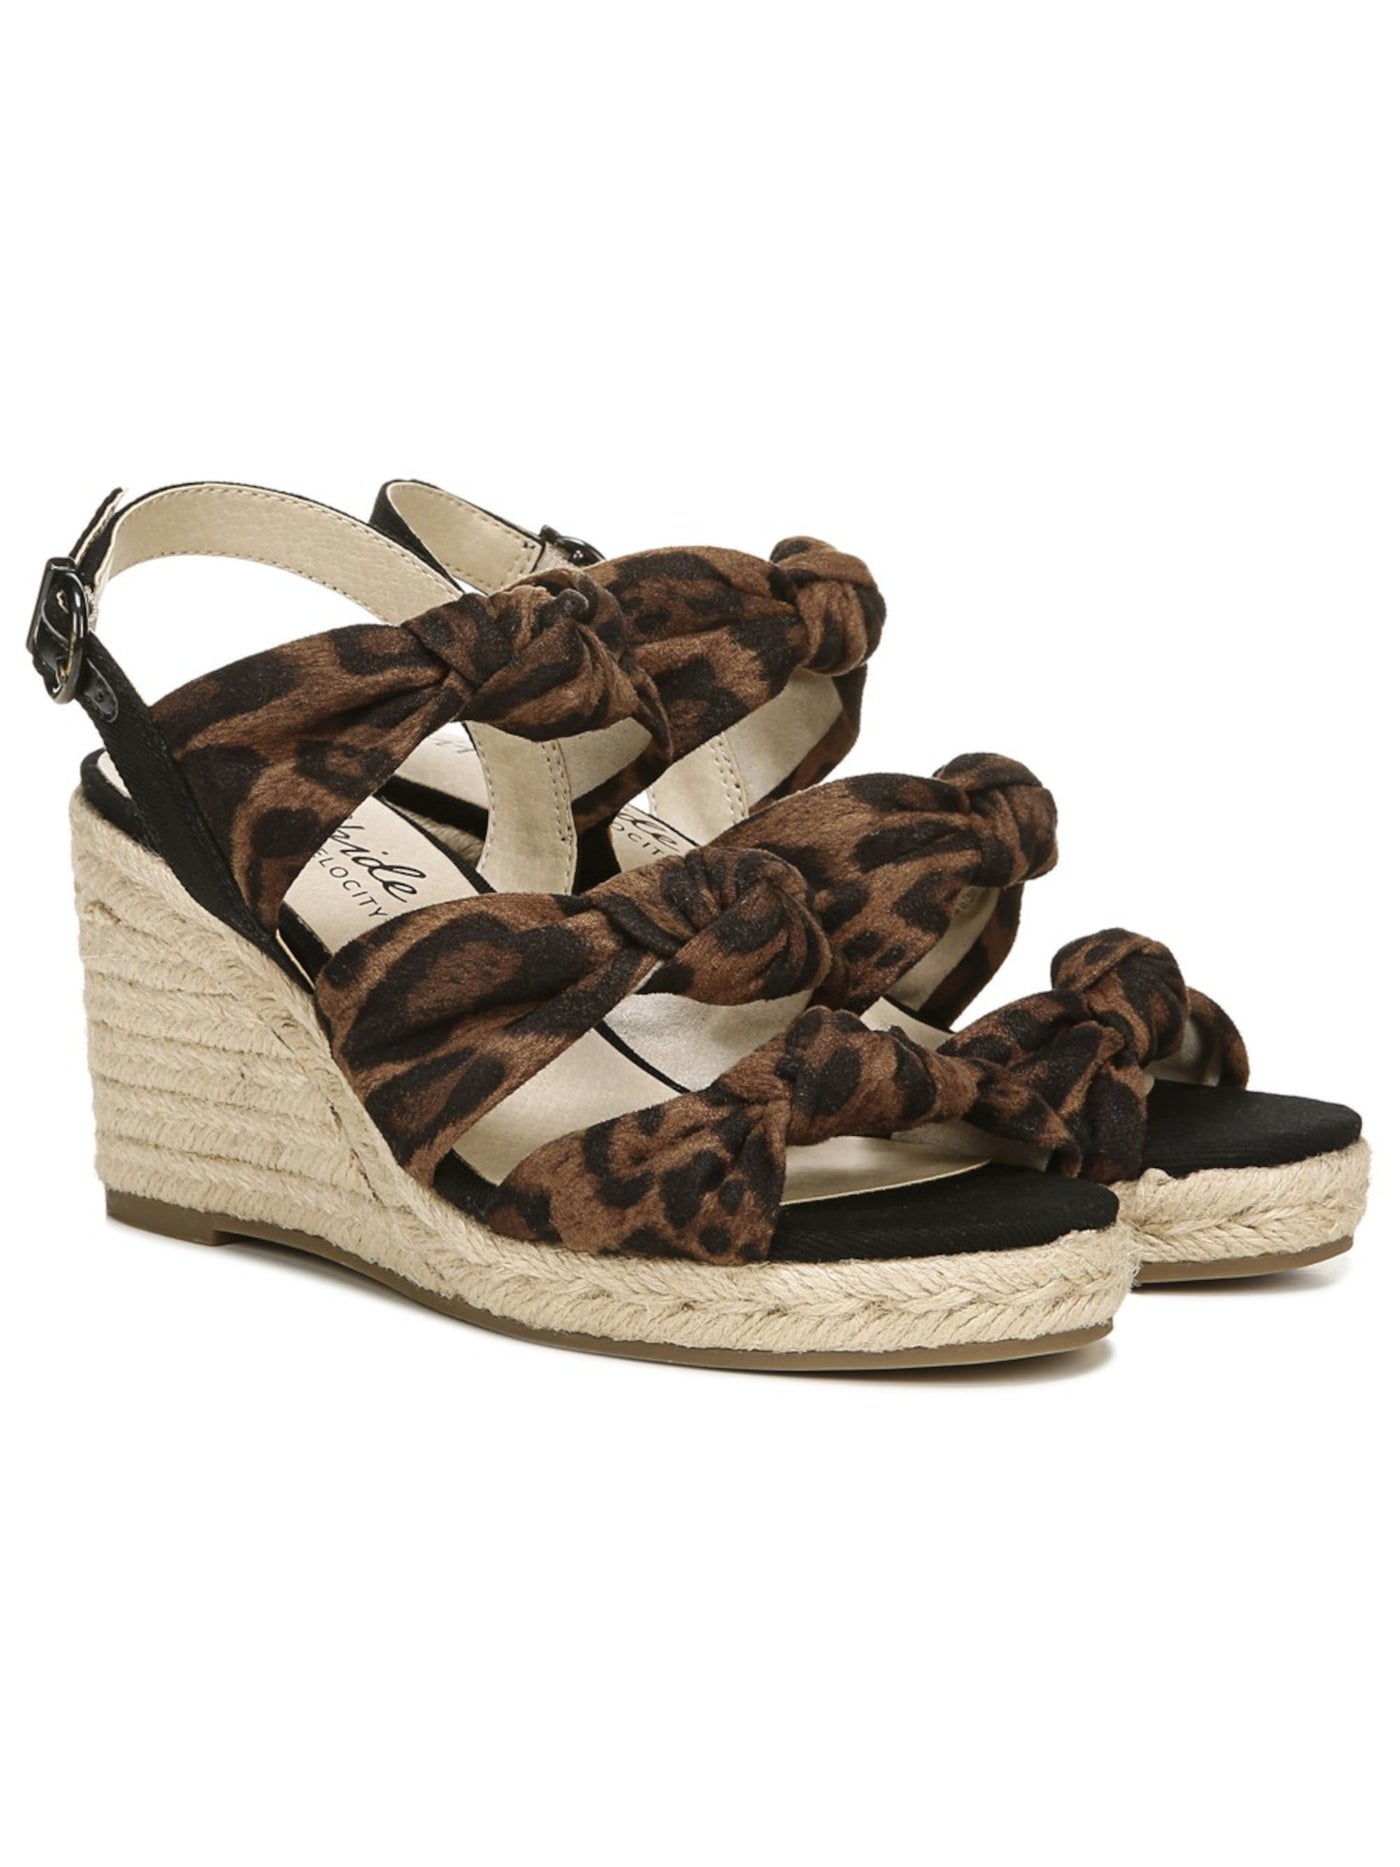 LIFE STRIDE Womens Brown Animal Print Knotted Straps Cushioned Goring Talent Open Toe Wedge Buckle Espadrille Shoes 9 M